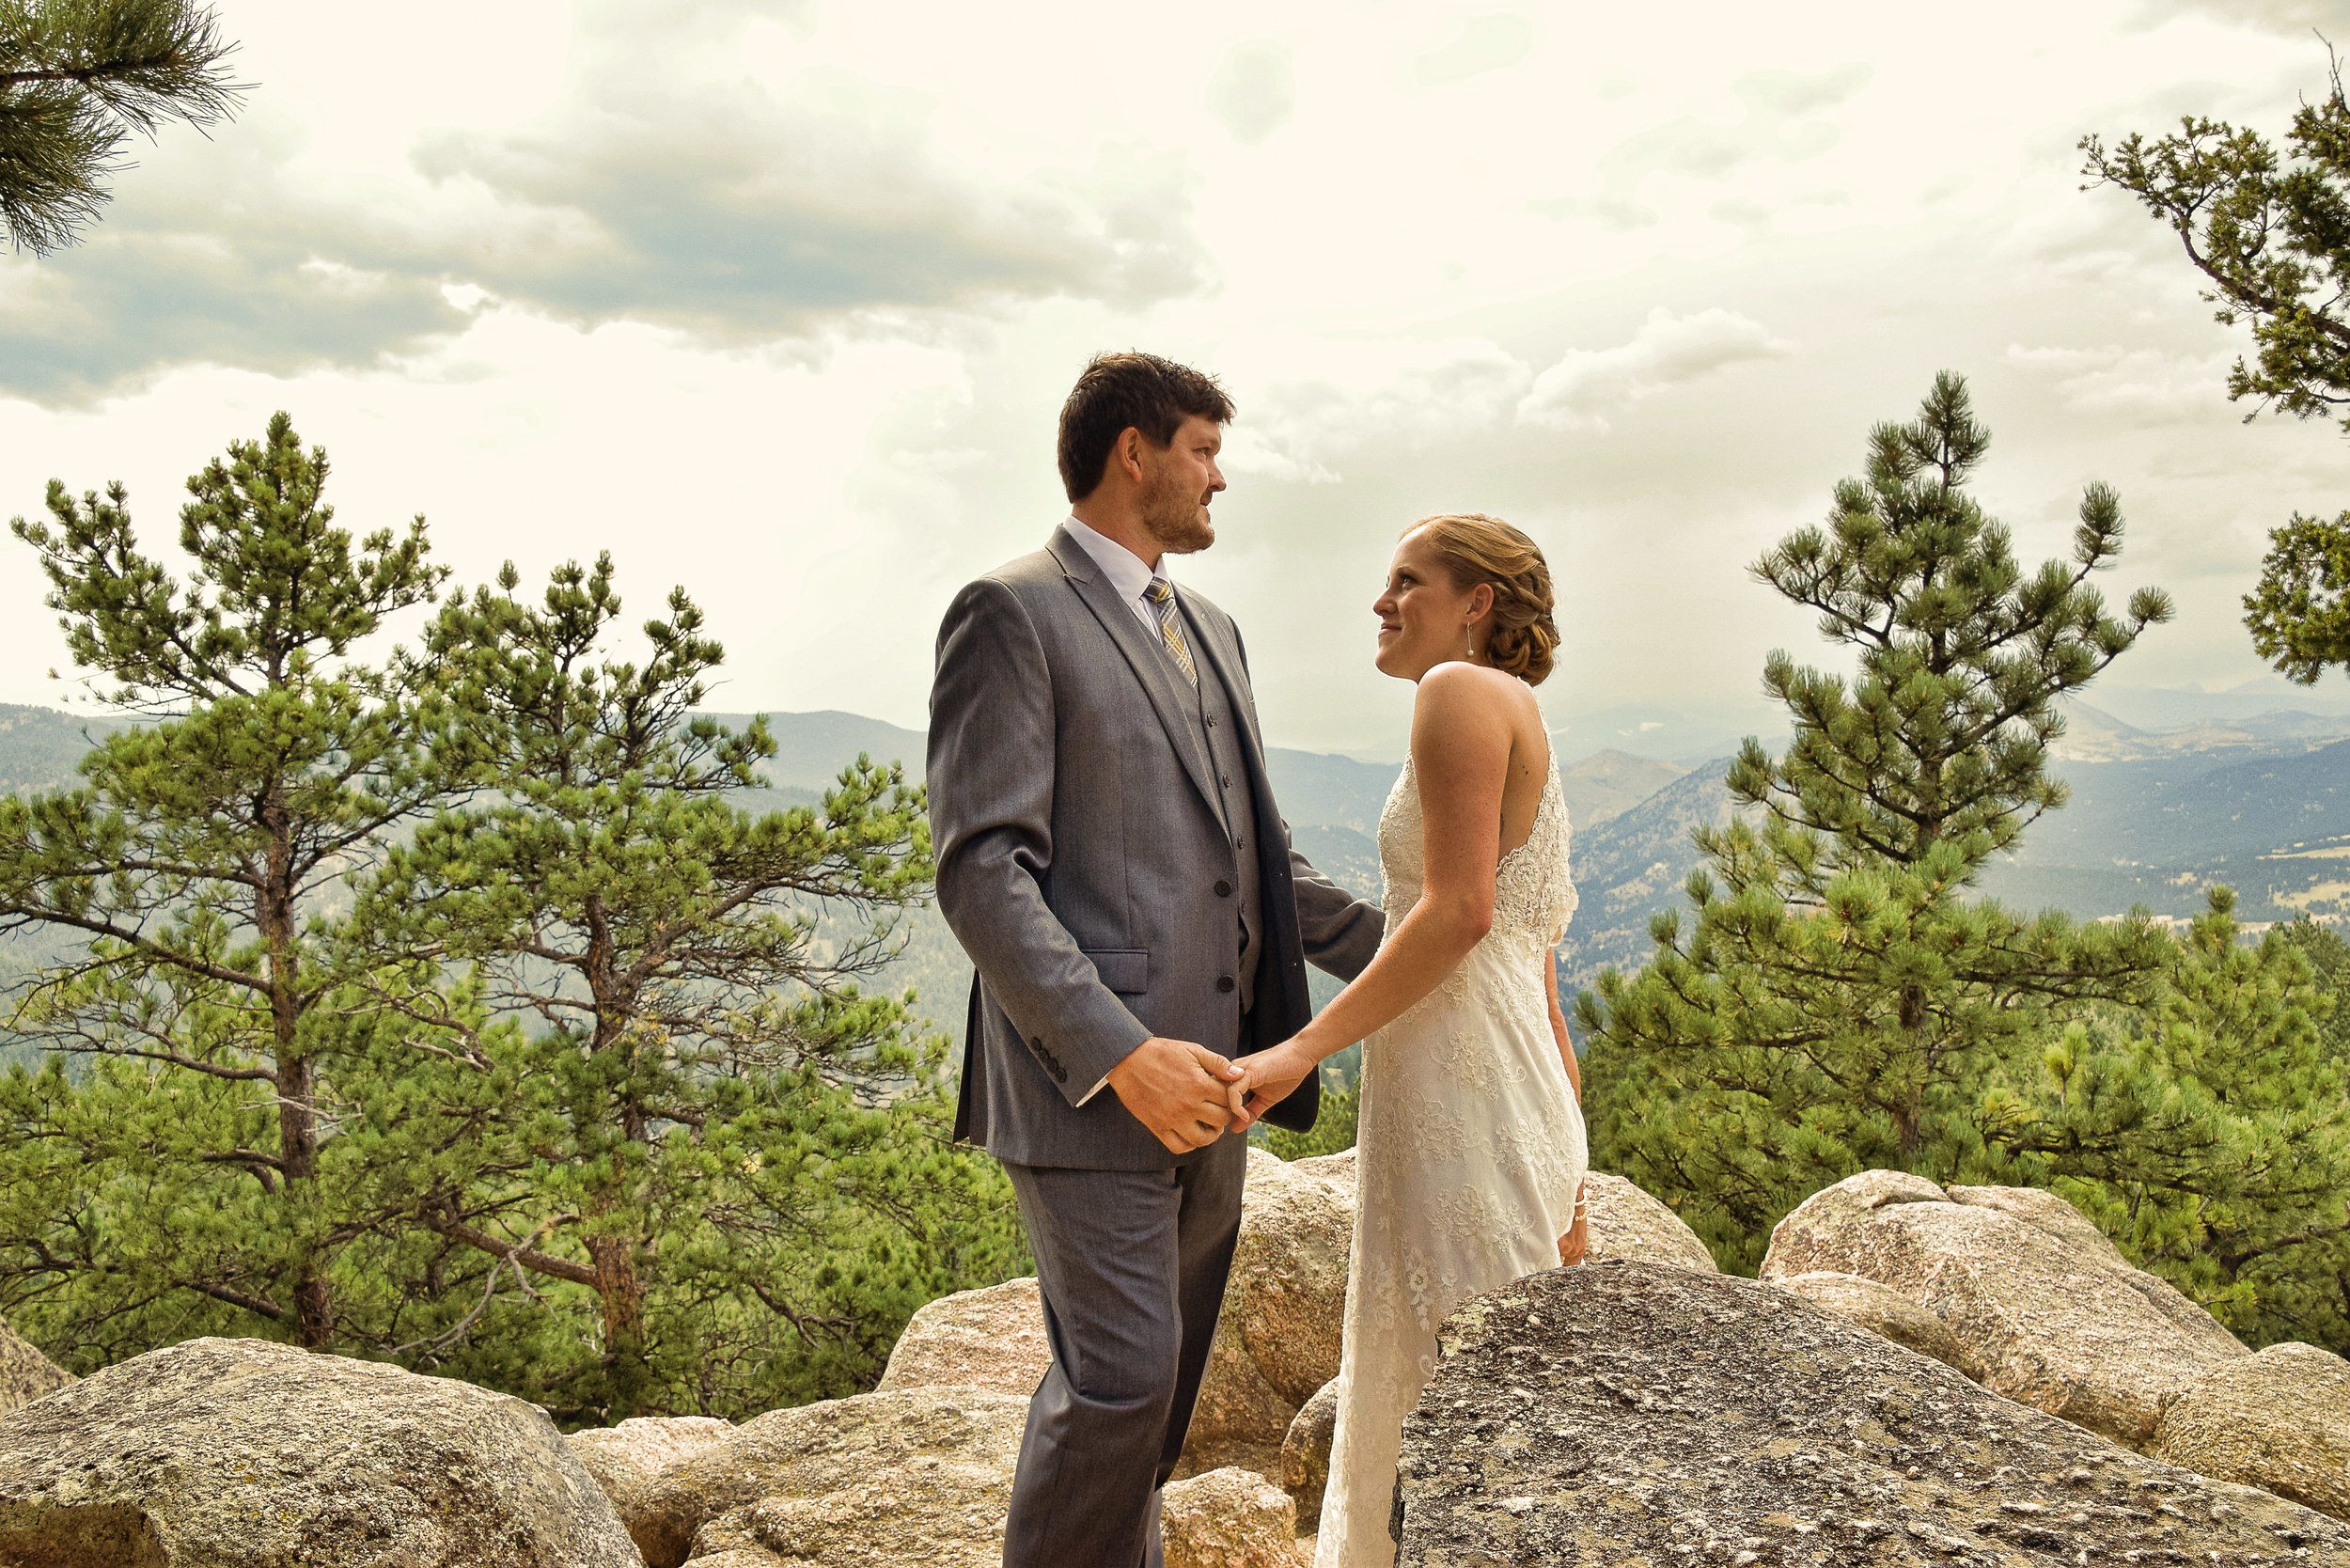 Candid shot of bride and groom in mountains.